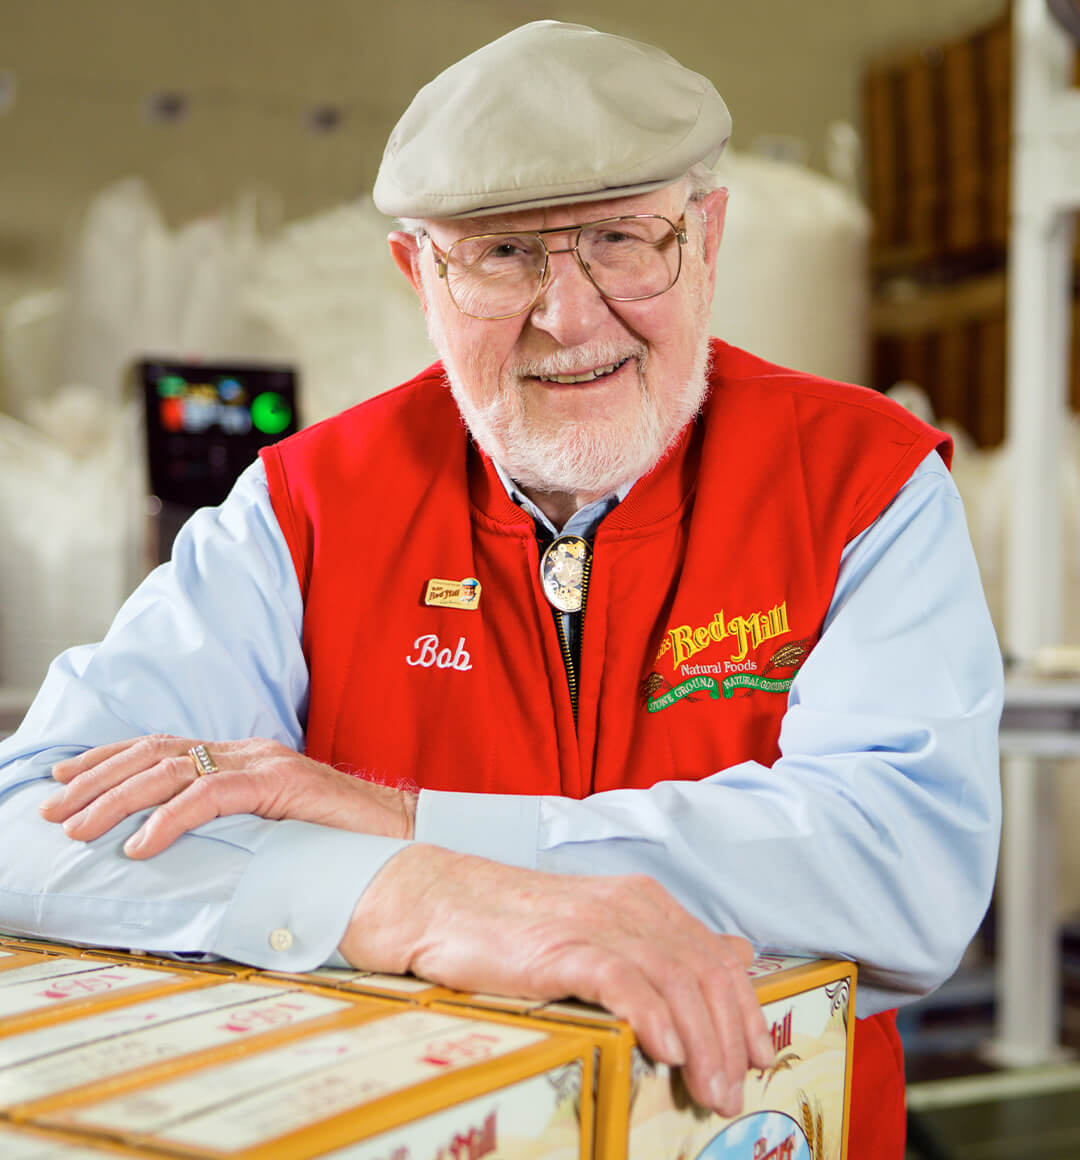 a portrait of Bob, the founder of Bob's Red Mill. He is wearing glasses, a blue longsleeve shirt and red vest.